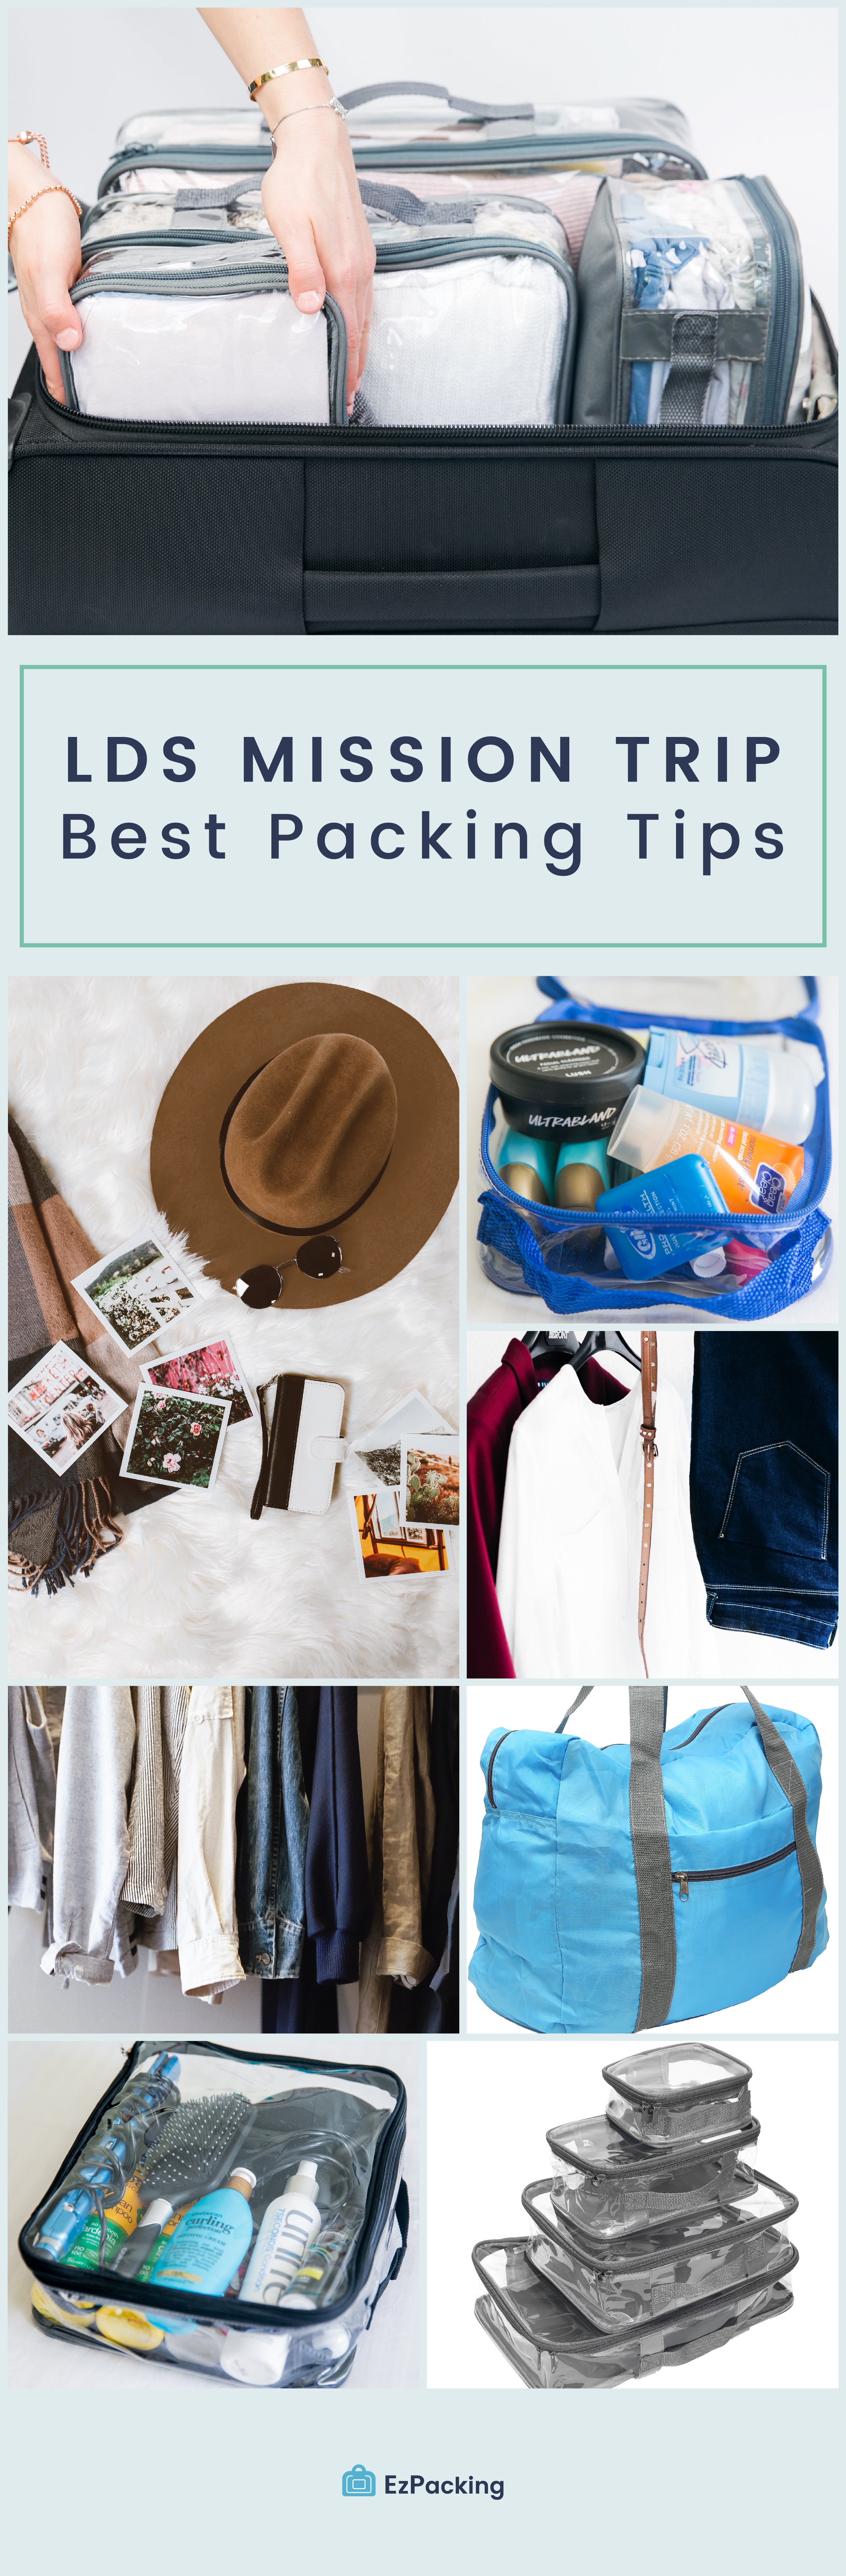 LDS Mission Trip Packing Tips